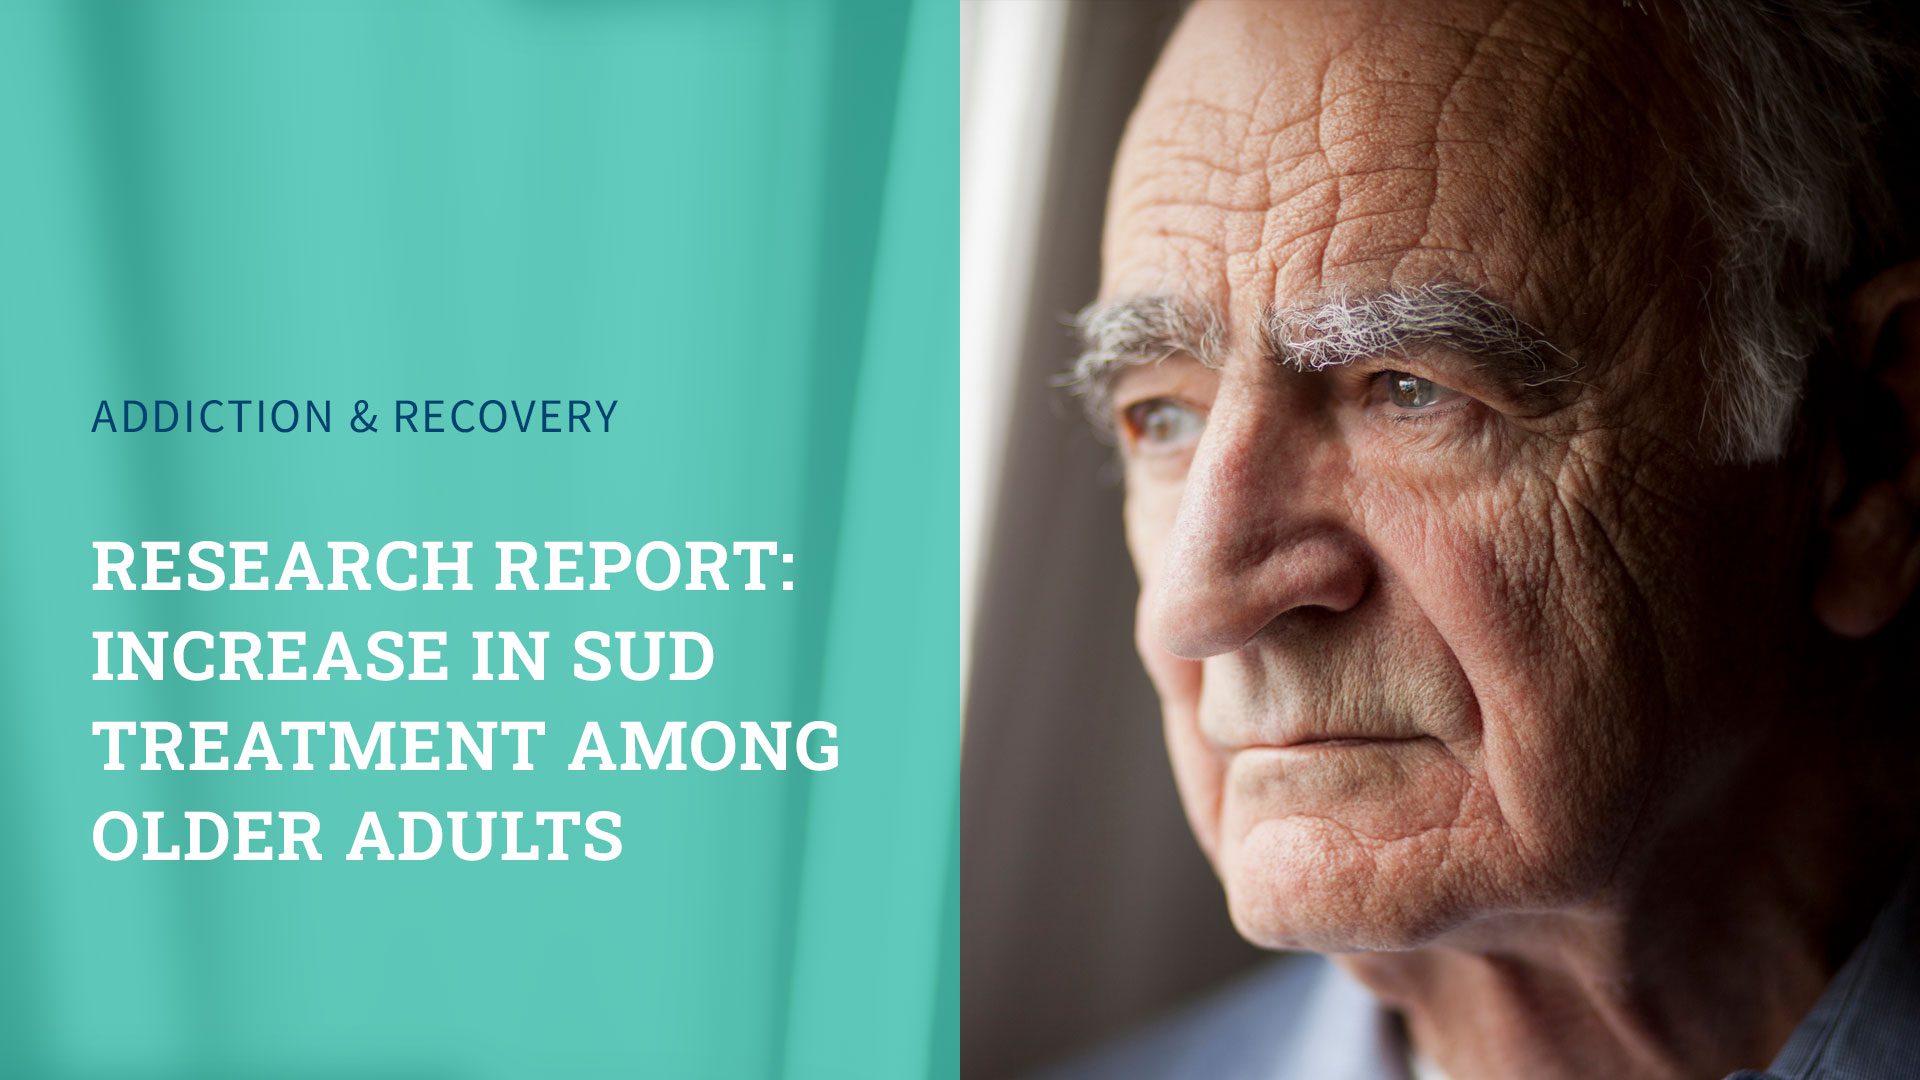 Research Report: Increase in SUD Treatment Among Older Adults